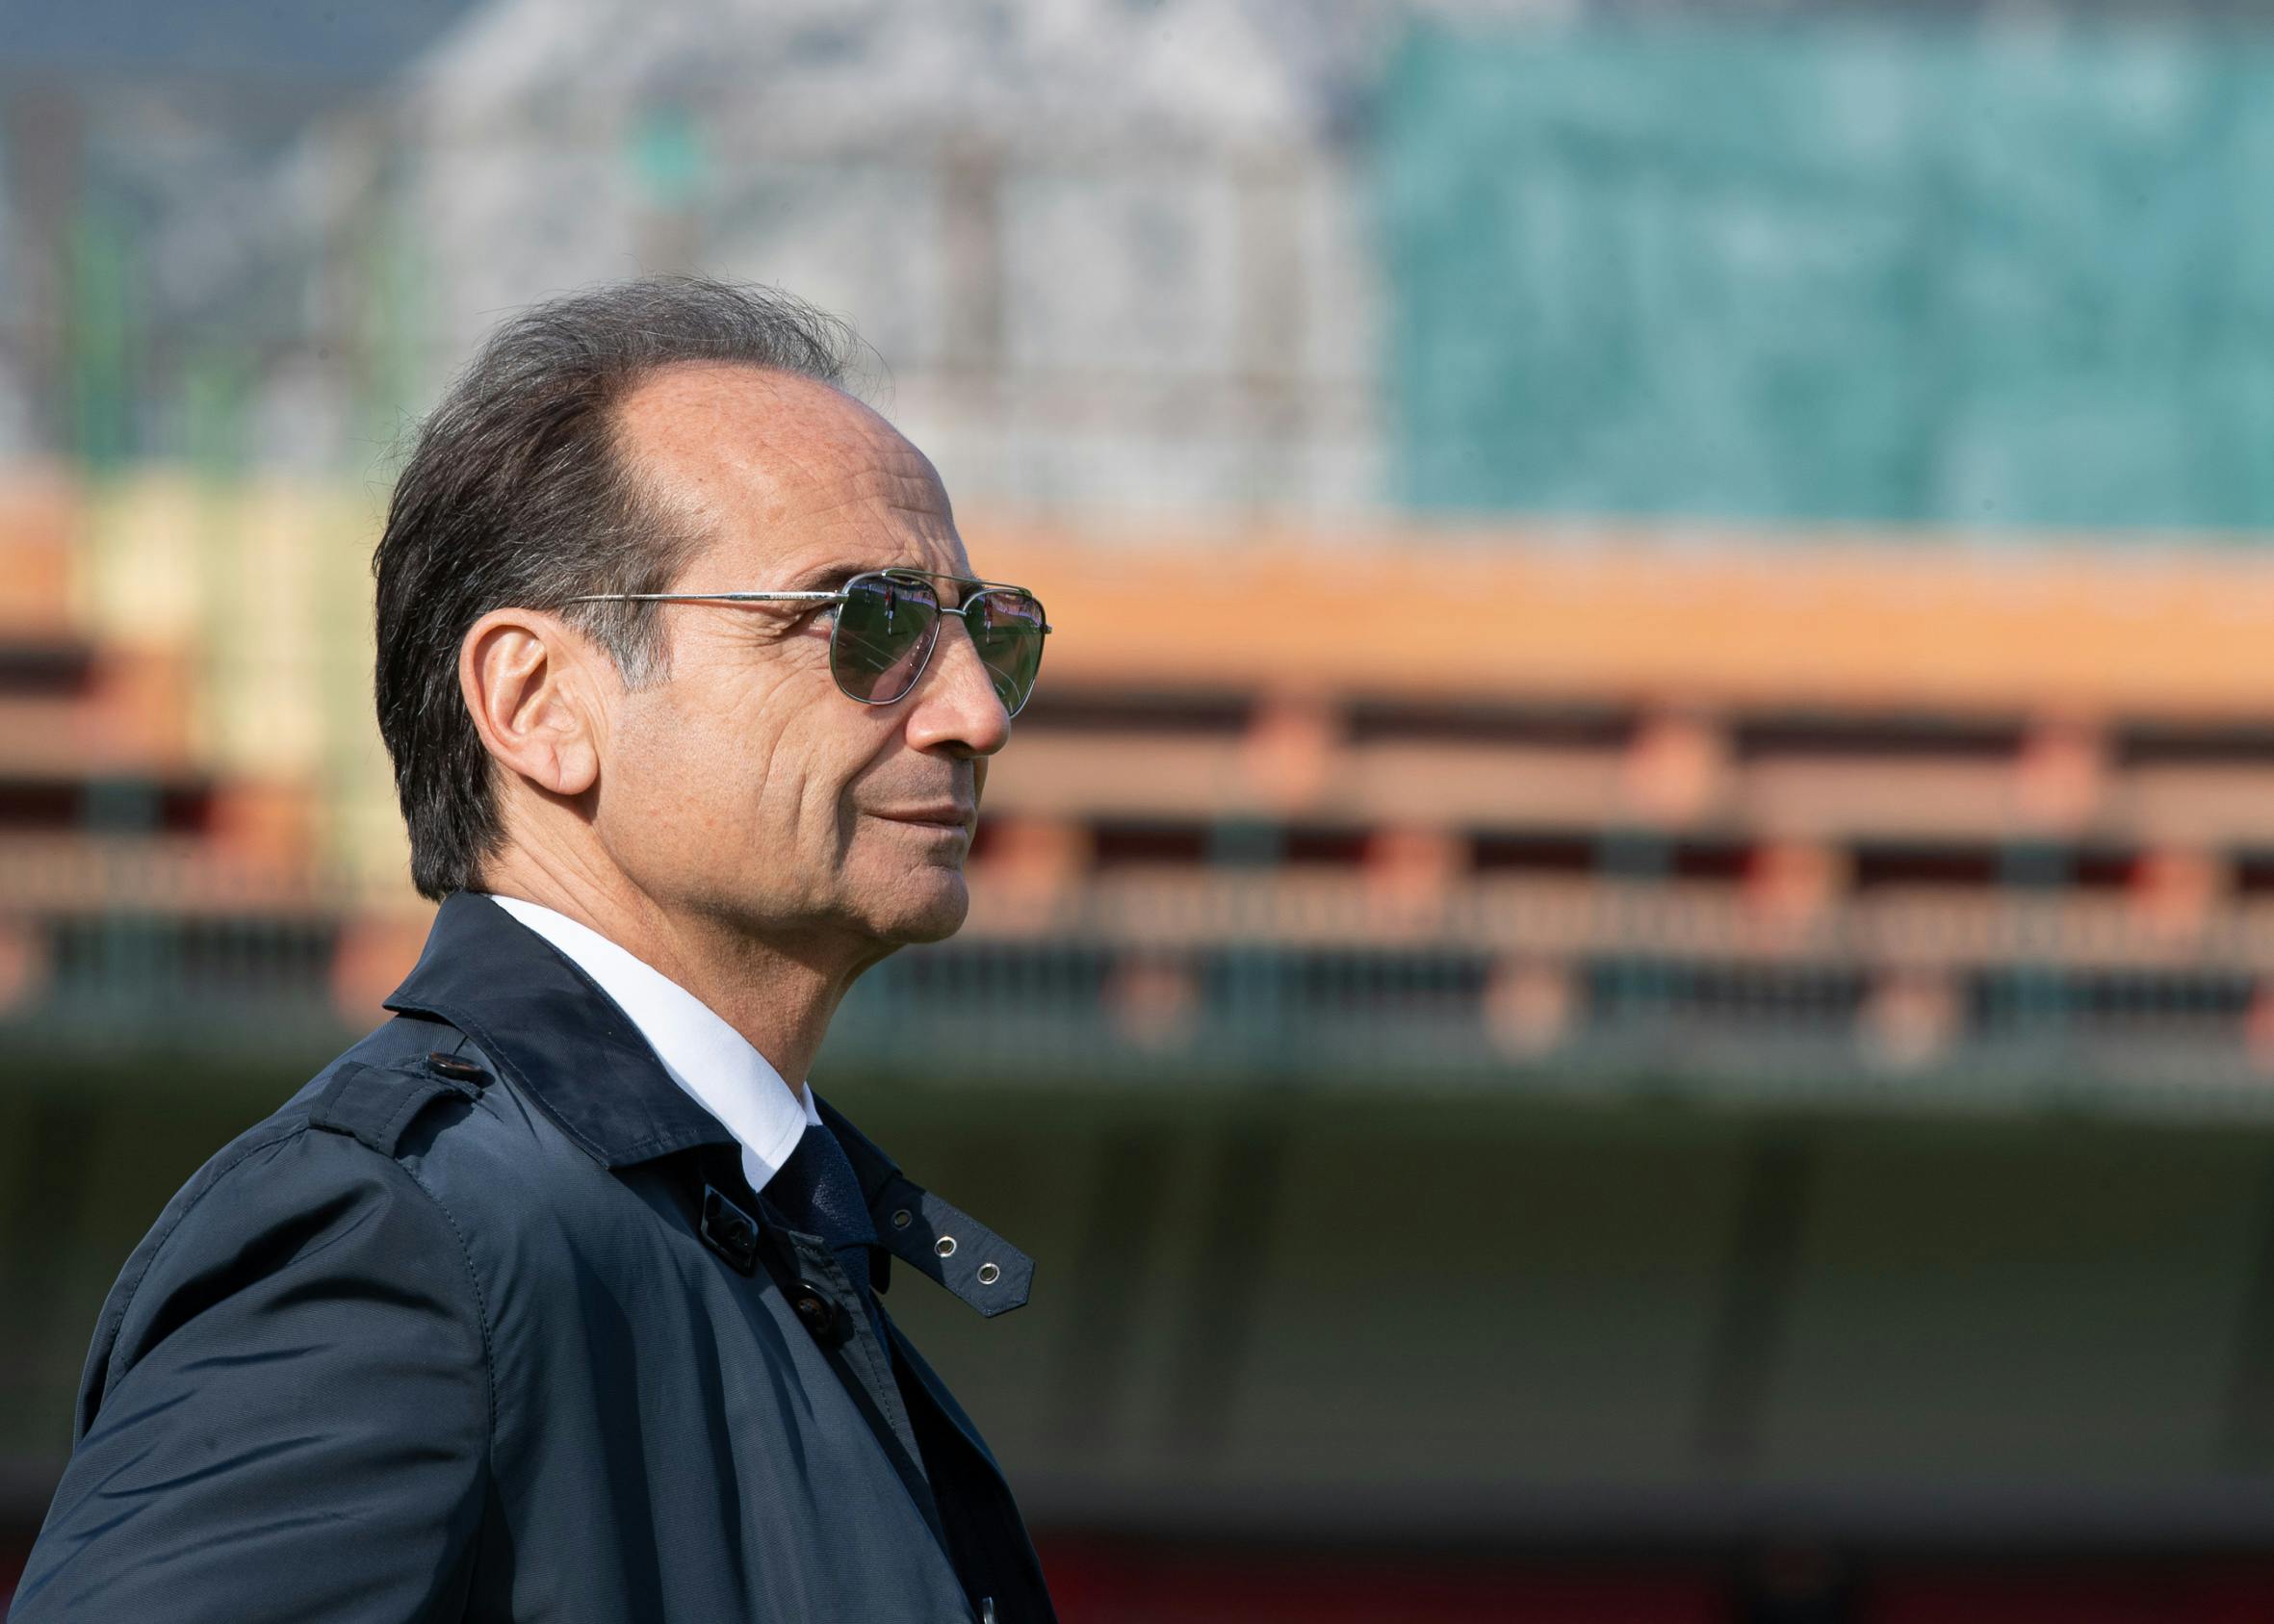 SPAL - Modena, the comment of technical director Lupo